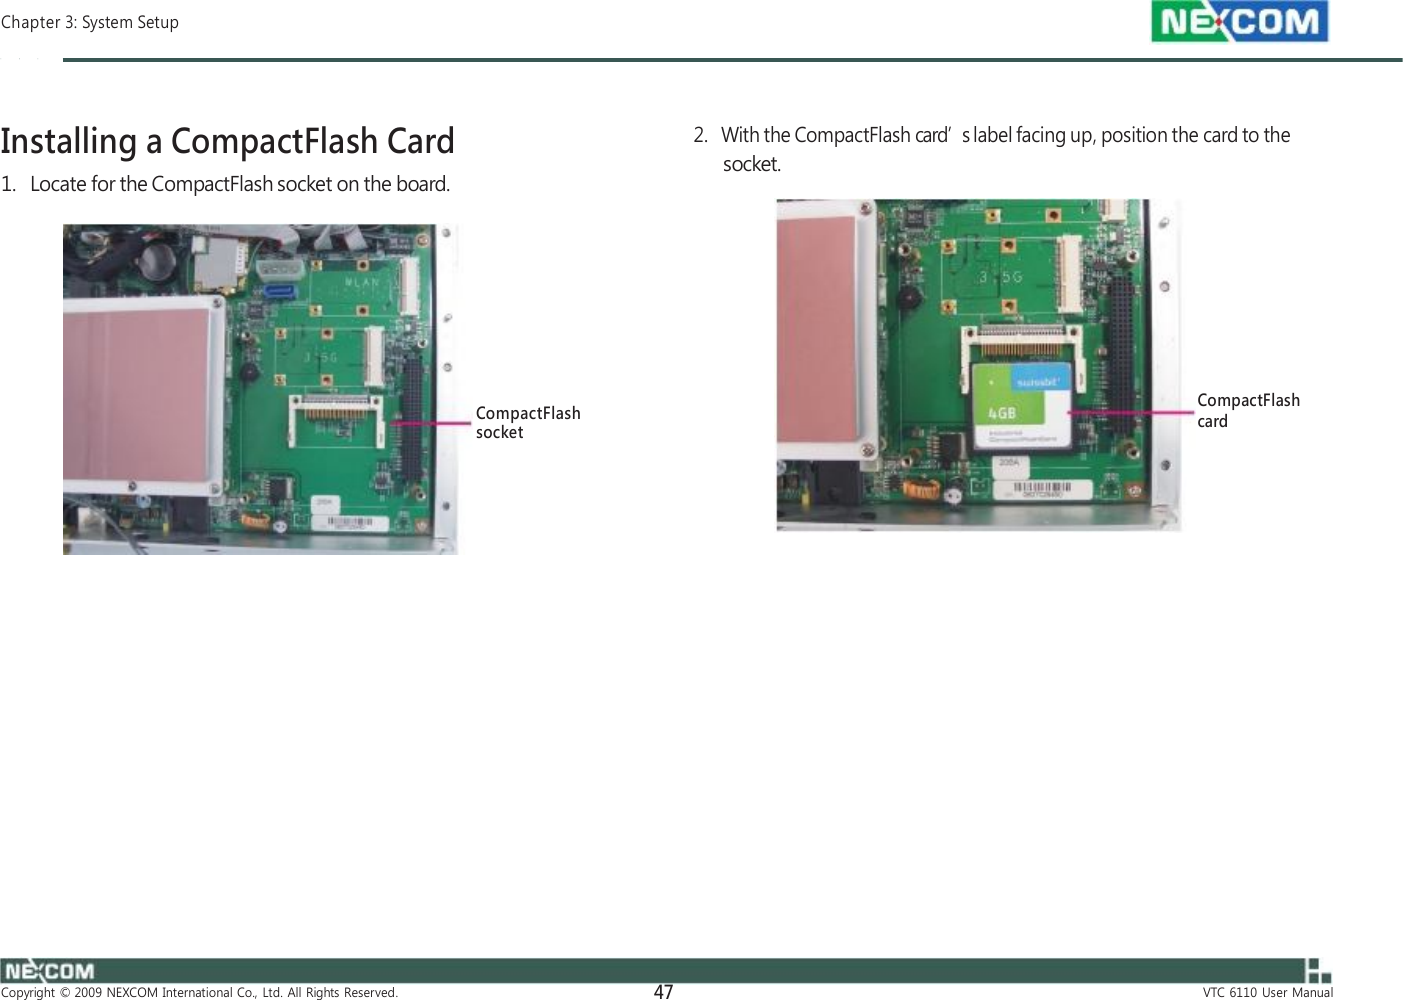  Chapter 3: System Setup    Installing a CompactFlash Card 1.   Locate for the CompactFlash socket on the board.         CompactFlash socket                      Copyright  ©  2009  NEXCOM  International  Co.,  Ltd.  All  Rights  Reserved. 47    2.   With the CompactFlash card’s label facing up, position the card to the socket.         CompactFlash card                       VTC  6110  User  Manual 